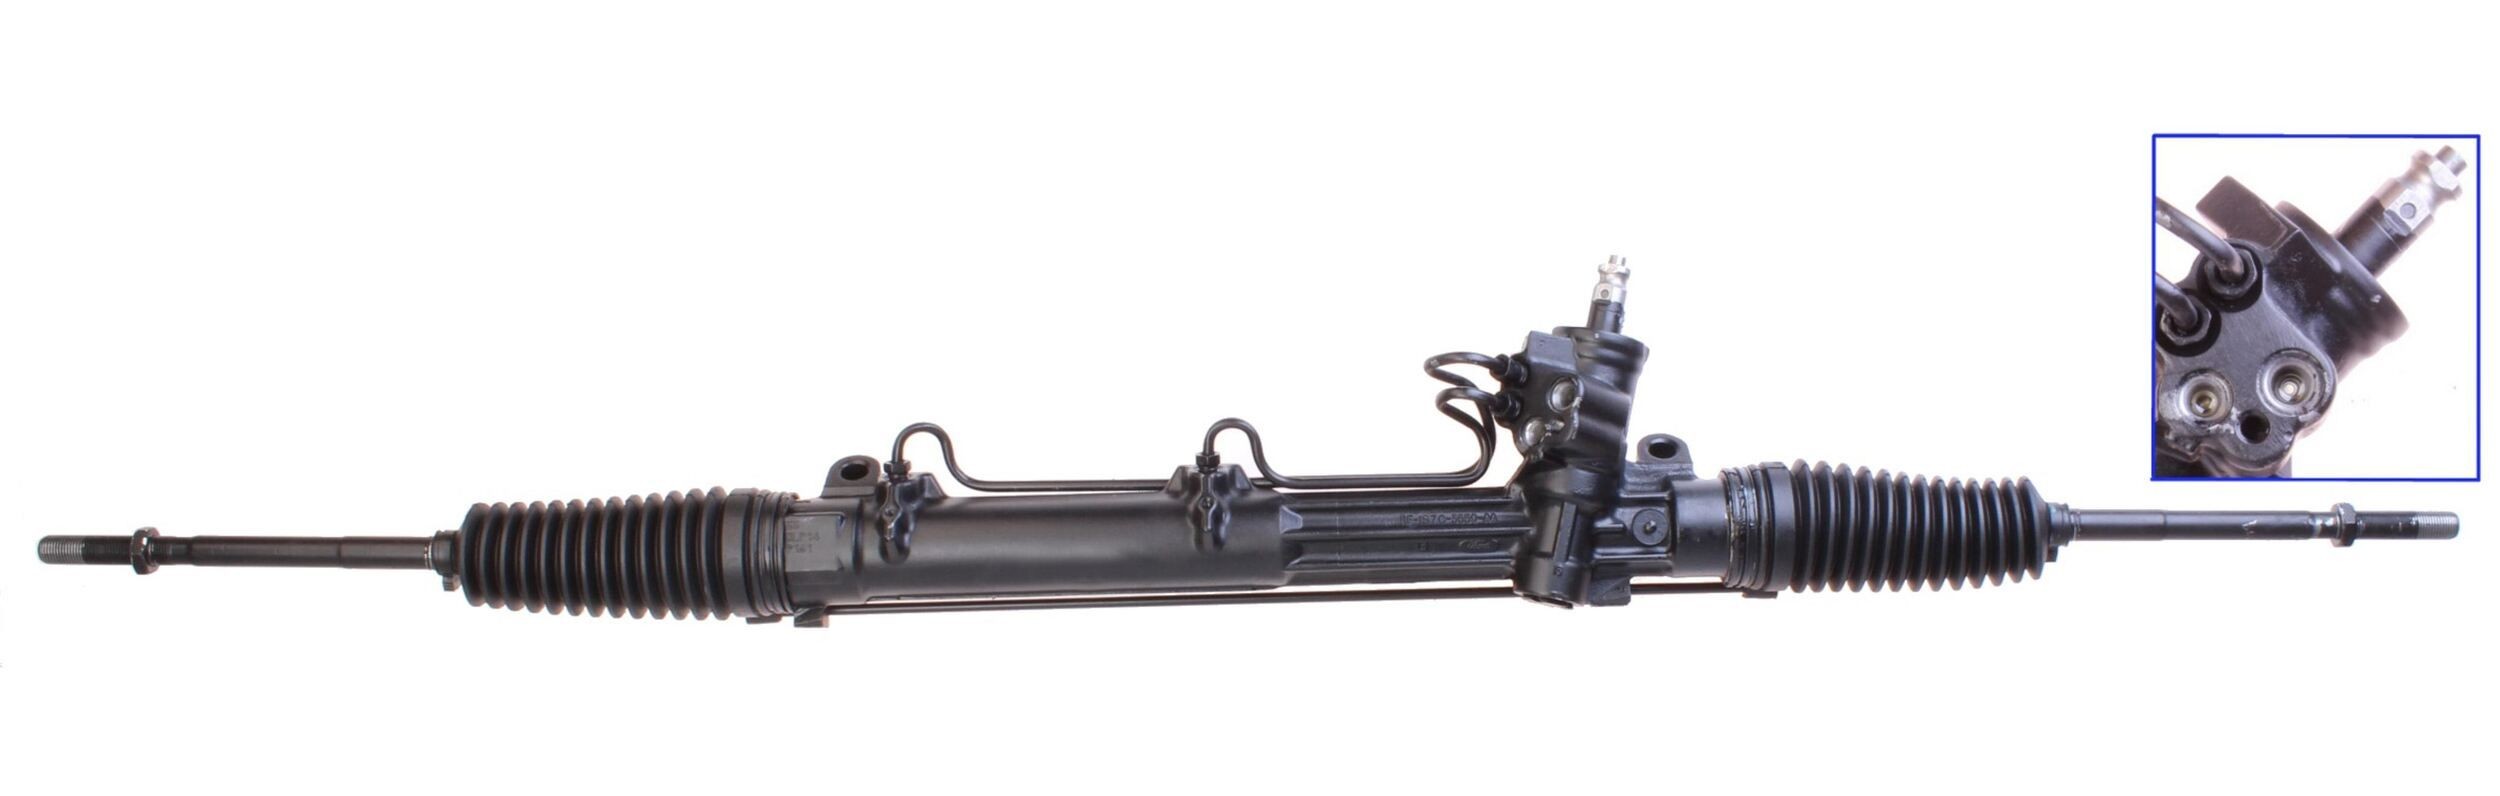 Steering rack DRI Hydraulic, for left-hand drive vehicles, 1275 mm - 711520644